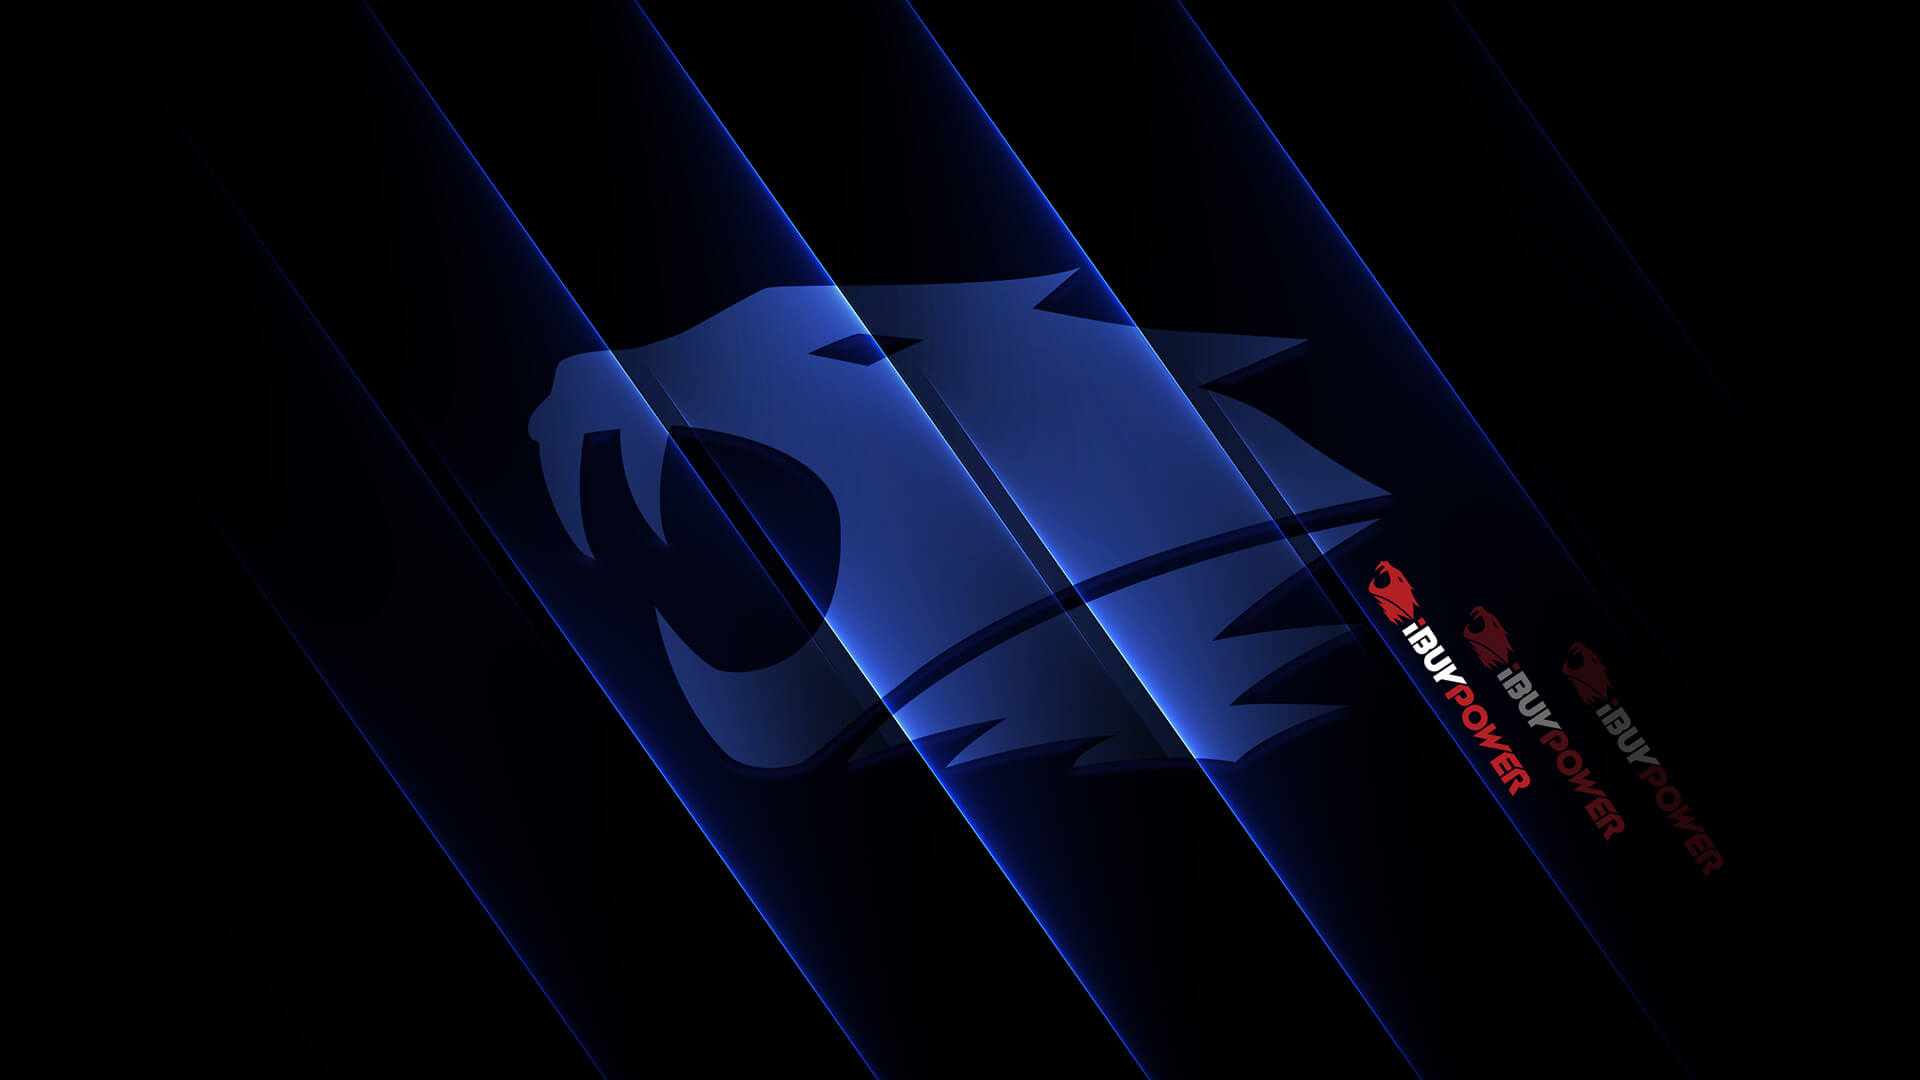 Asus Tuf Wallpaper 1920X1080 : 167 Asus Hd Wallpapers Background Images Wallpaper Abyss / Image ...